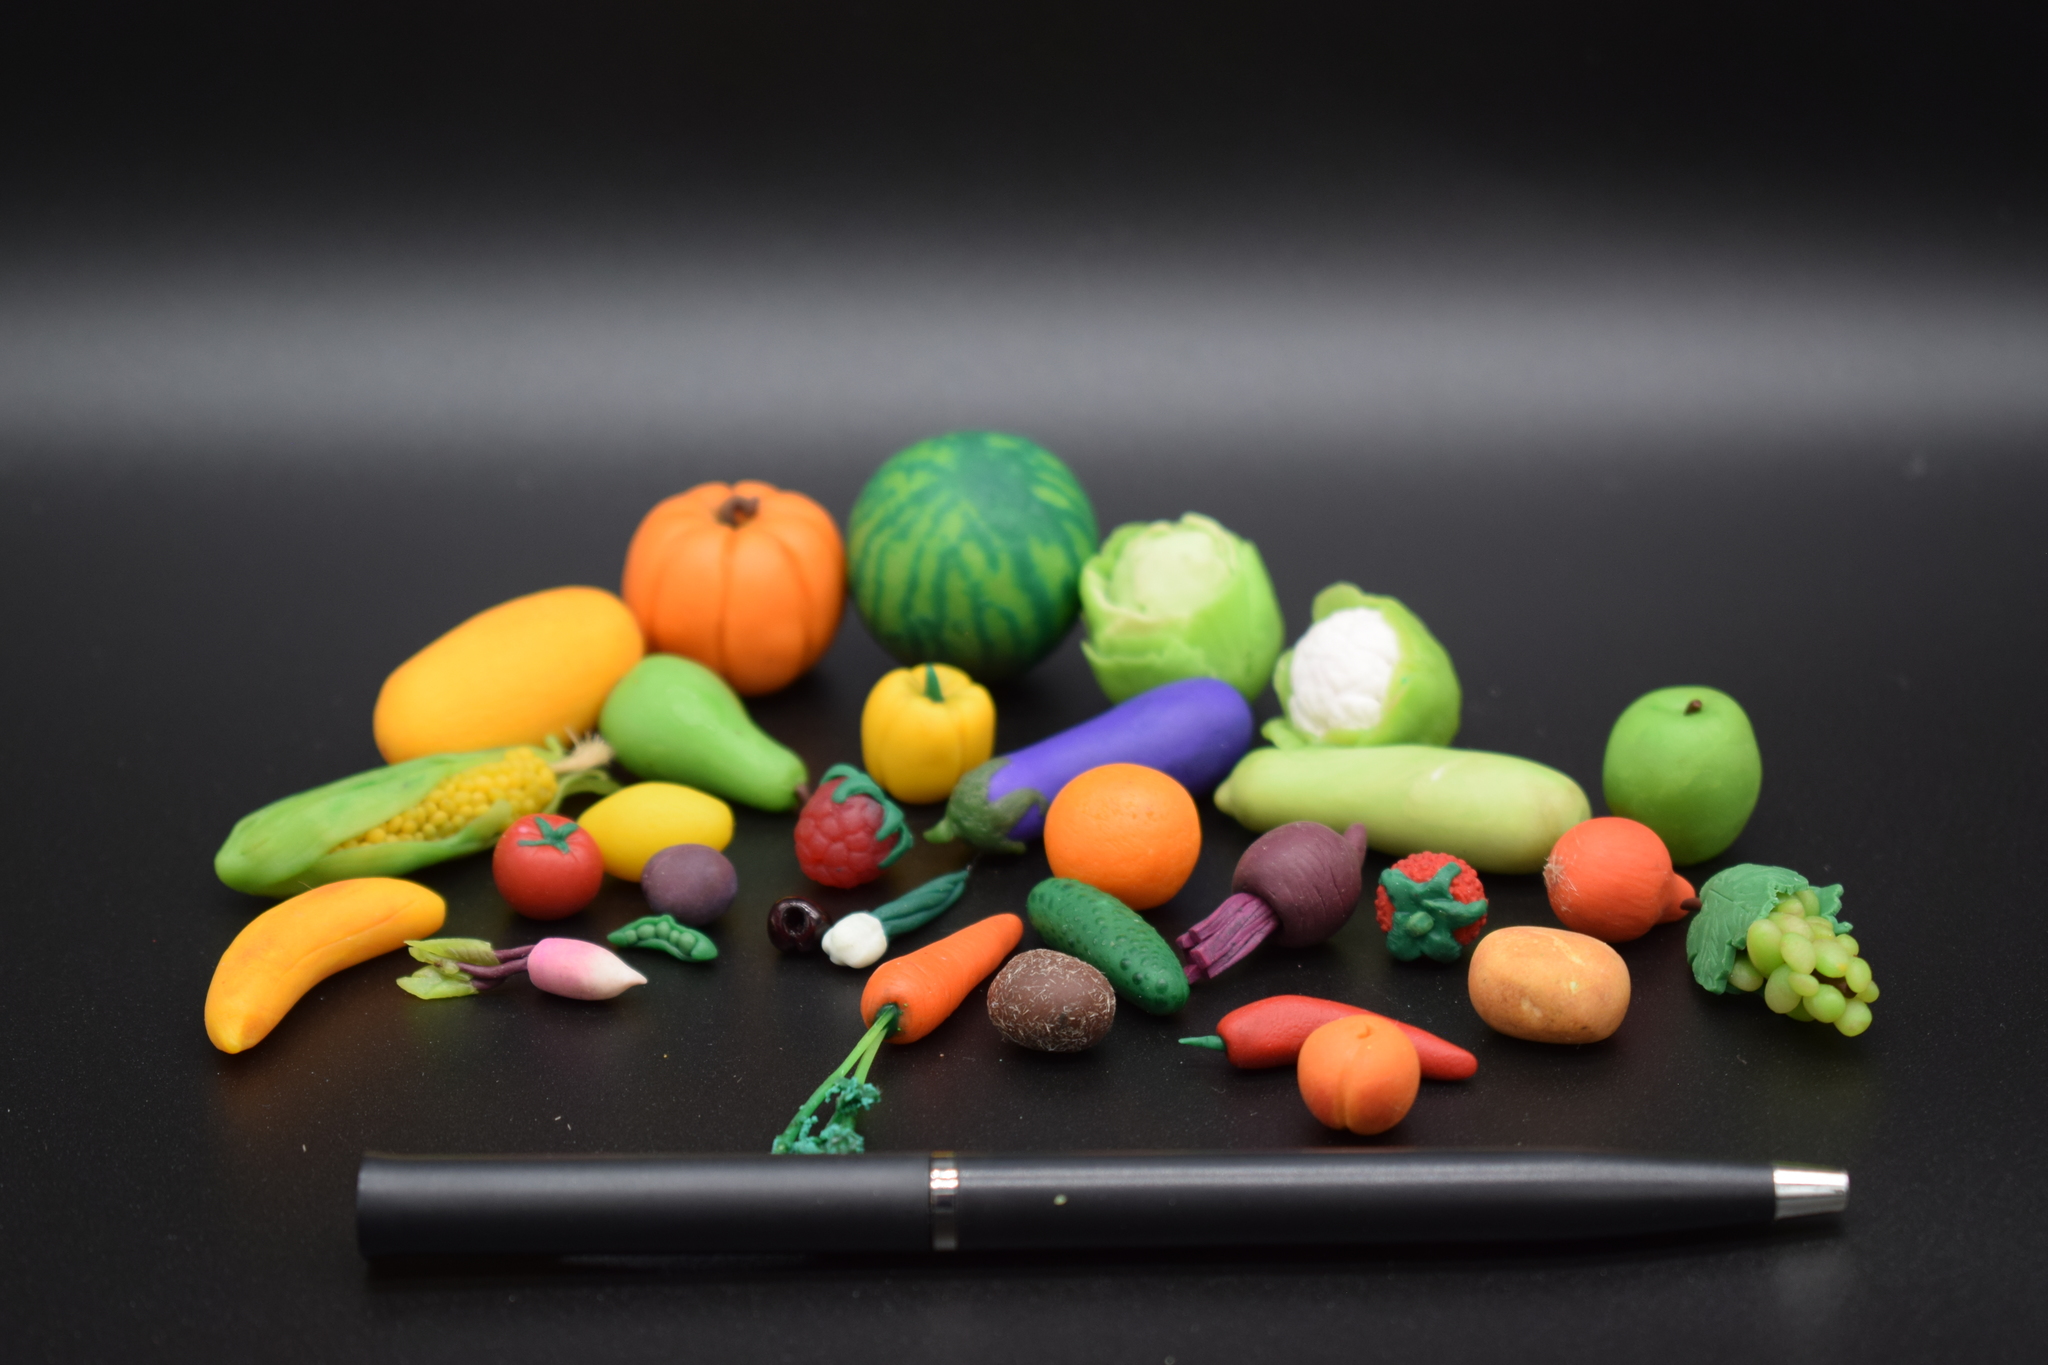 Miniature fruits and vegetables to play with - My, Polymer clay, Vegetables, Фрукты, Games, Toys, Barbie, Garden, Montessori, Figurines